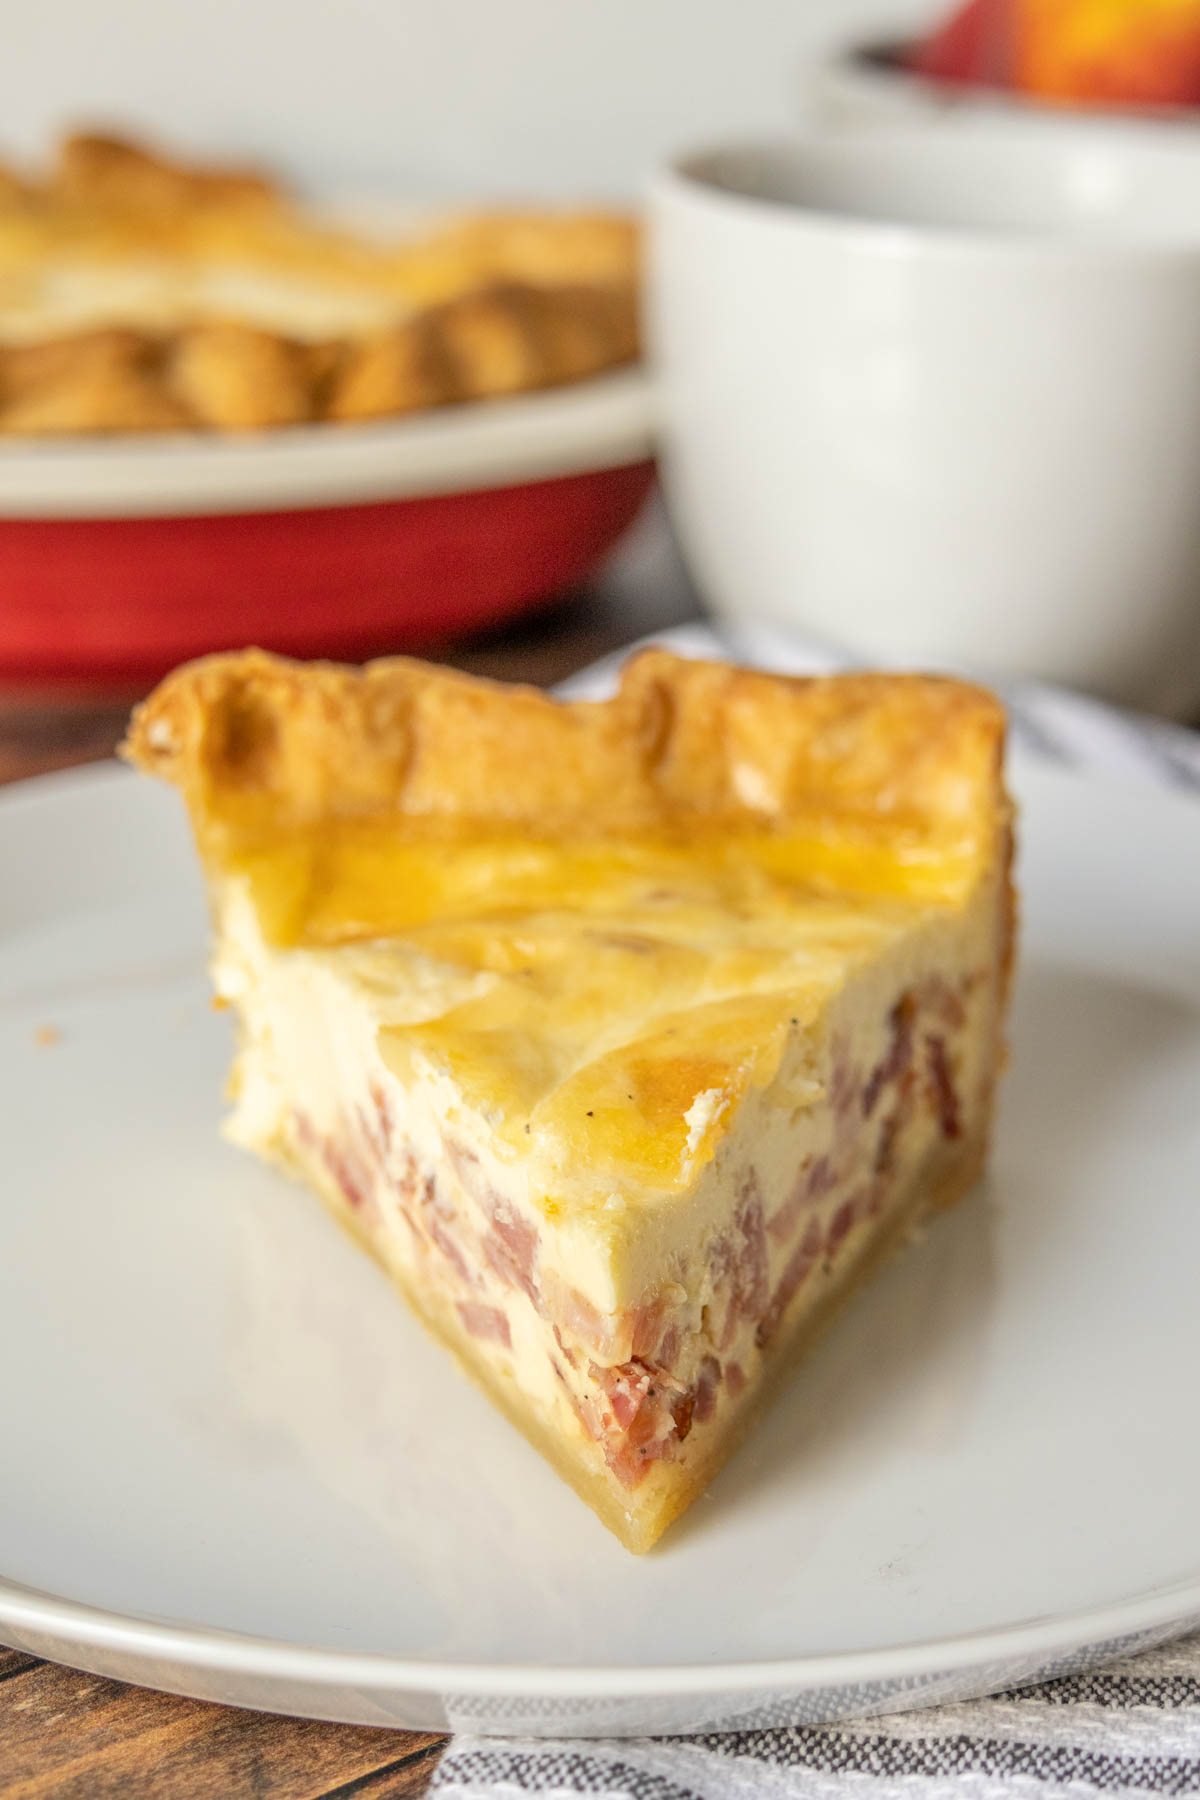 Slice of quiche lorraine on a plate from the front.